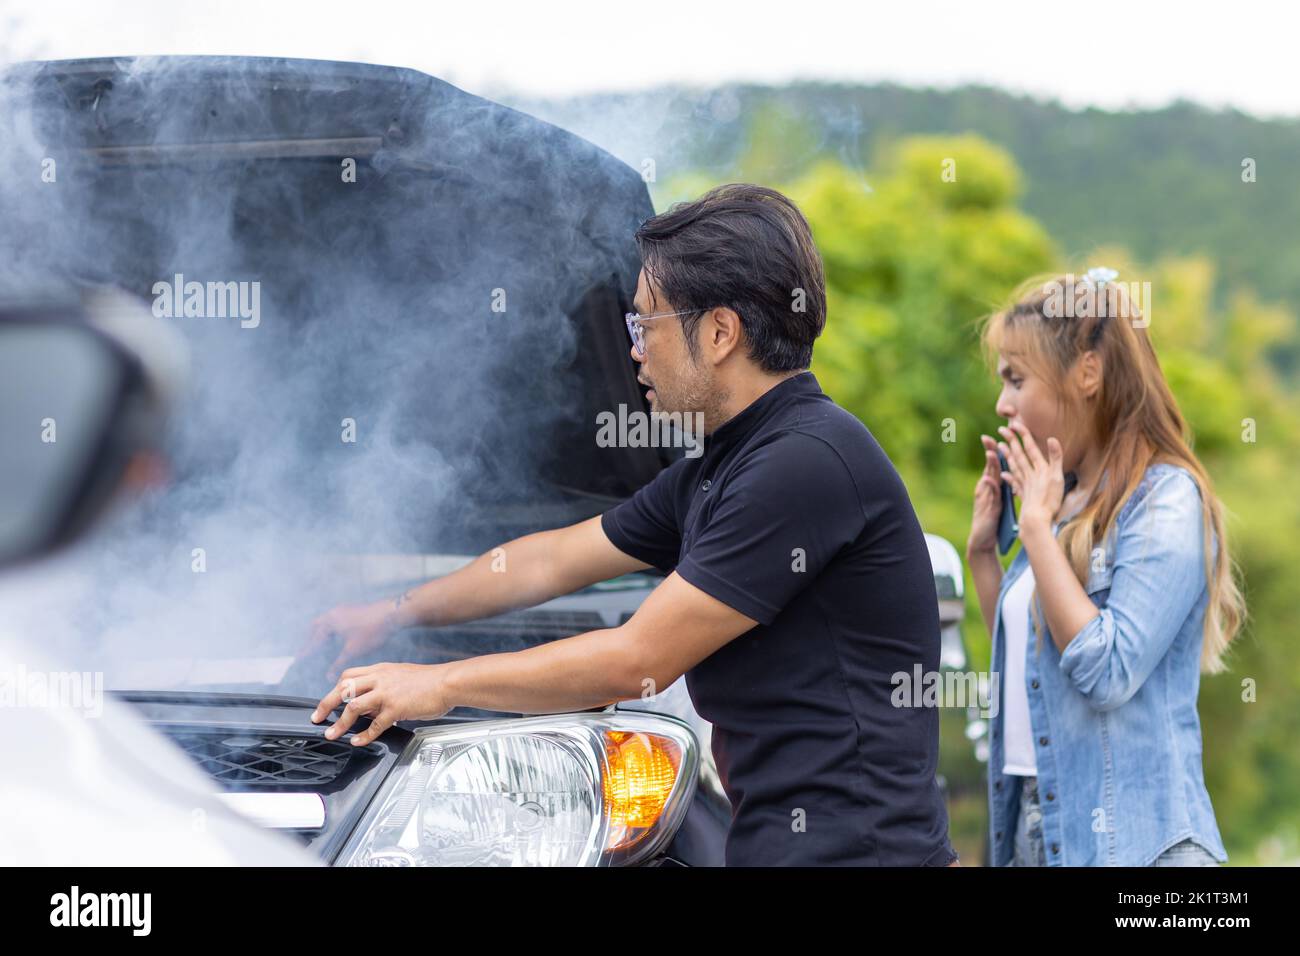 Car engine overheating, smoke out from engine front hood man help to check with shocked woman driver Stock Photo